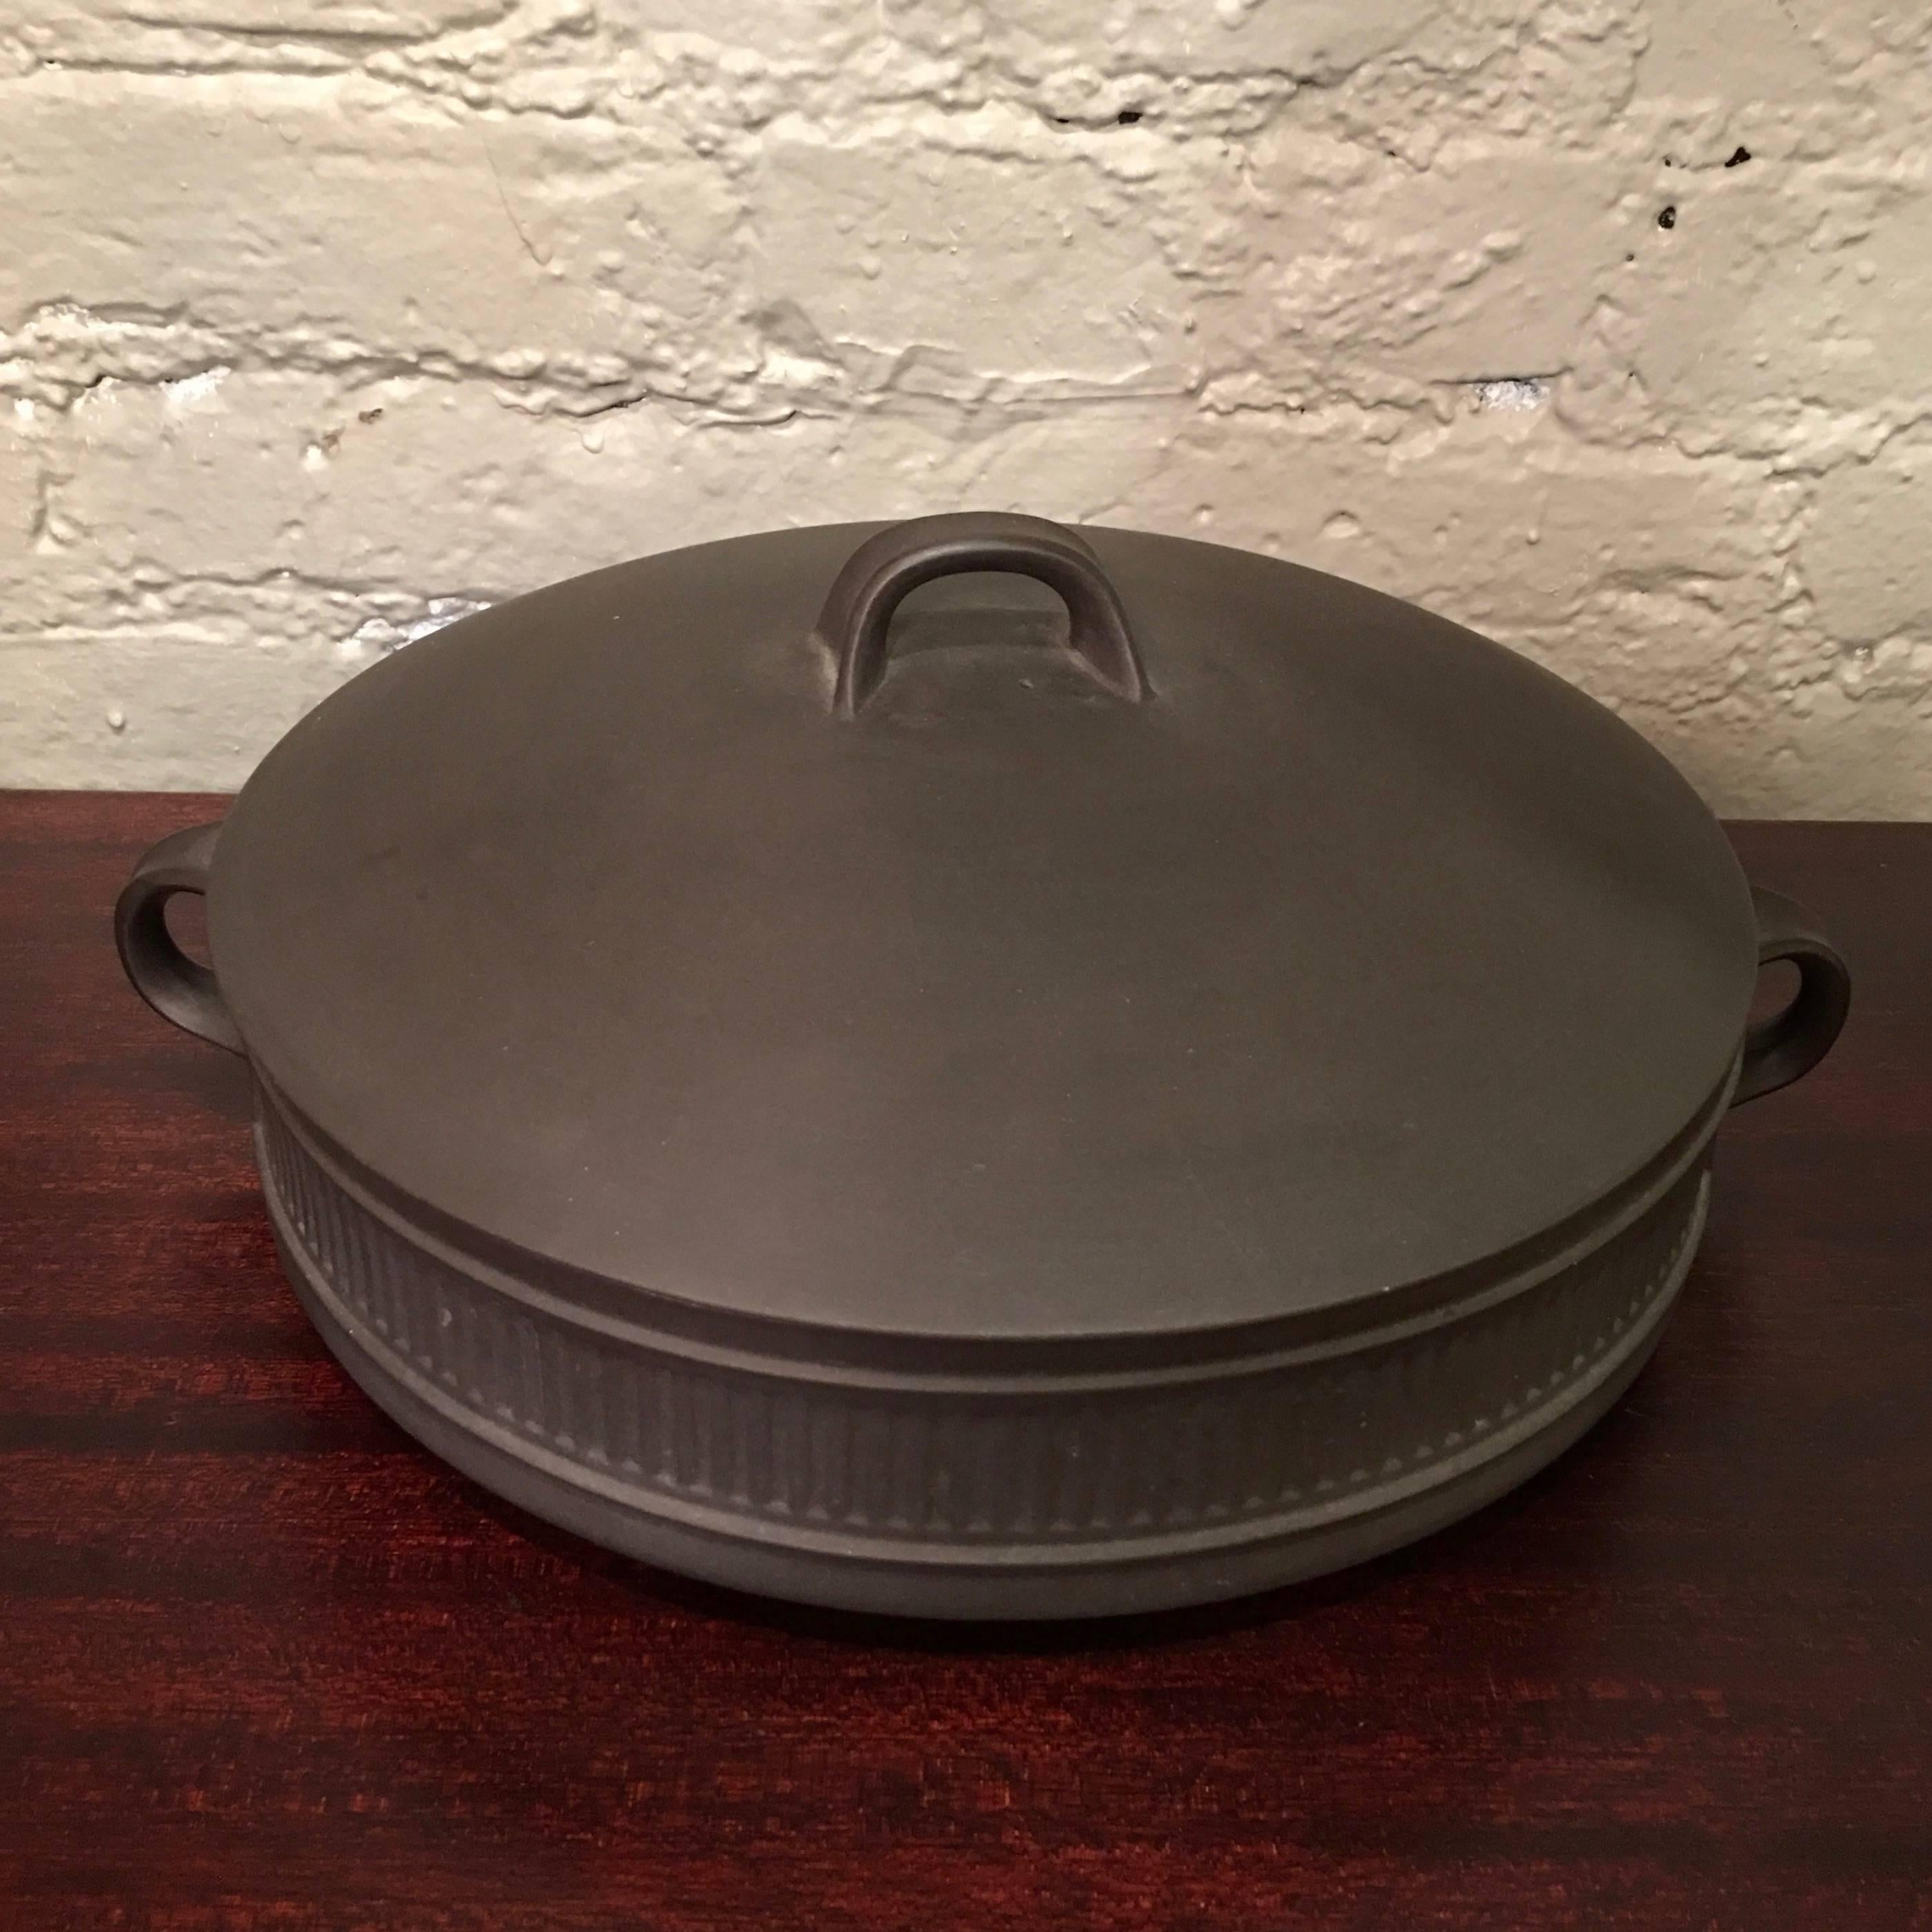 Danish modern, Flamestone cookware, casserole dish with cover by Jens Quistgaard for Dansk featuring a dark matte grey exterior with white glazed interior.